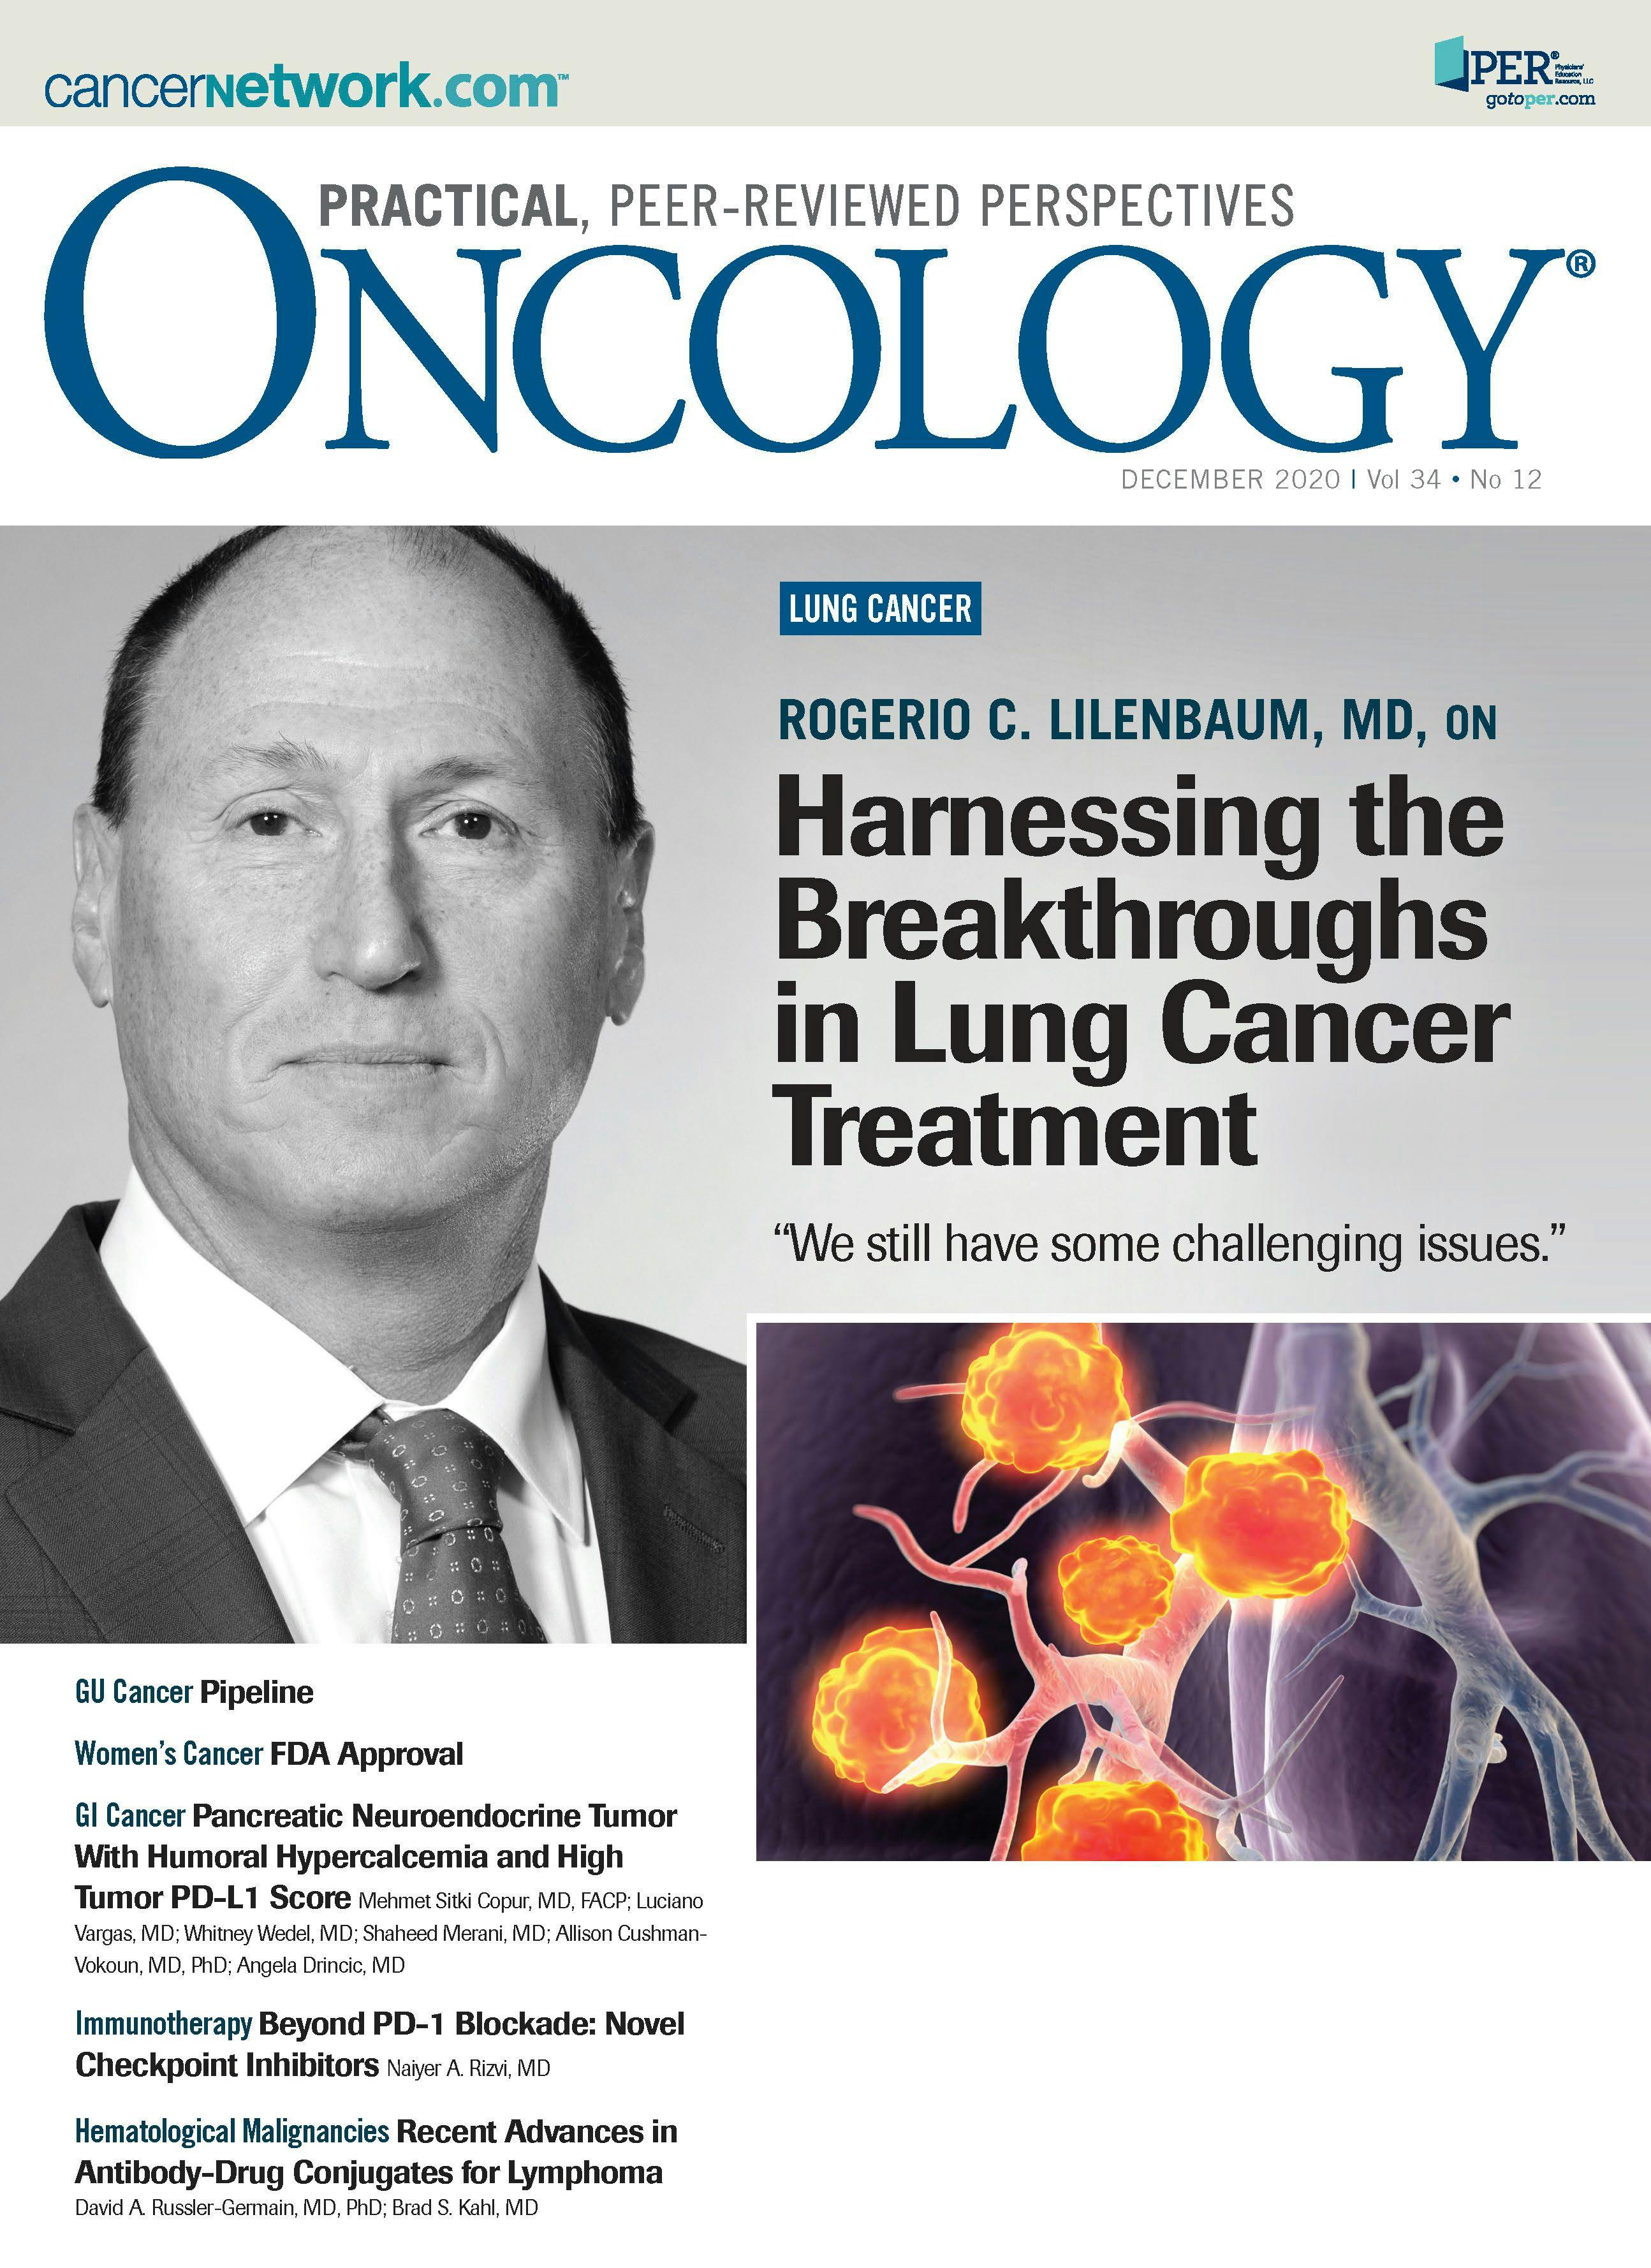 ONCOLOGY Vol 34 Issue 12